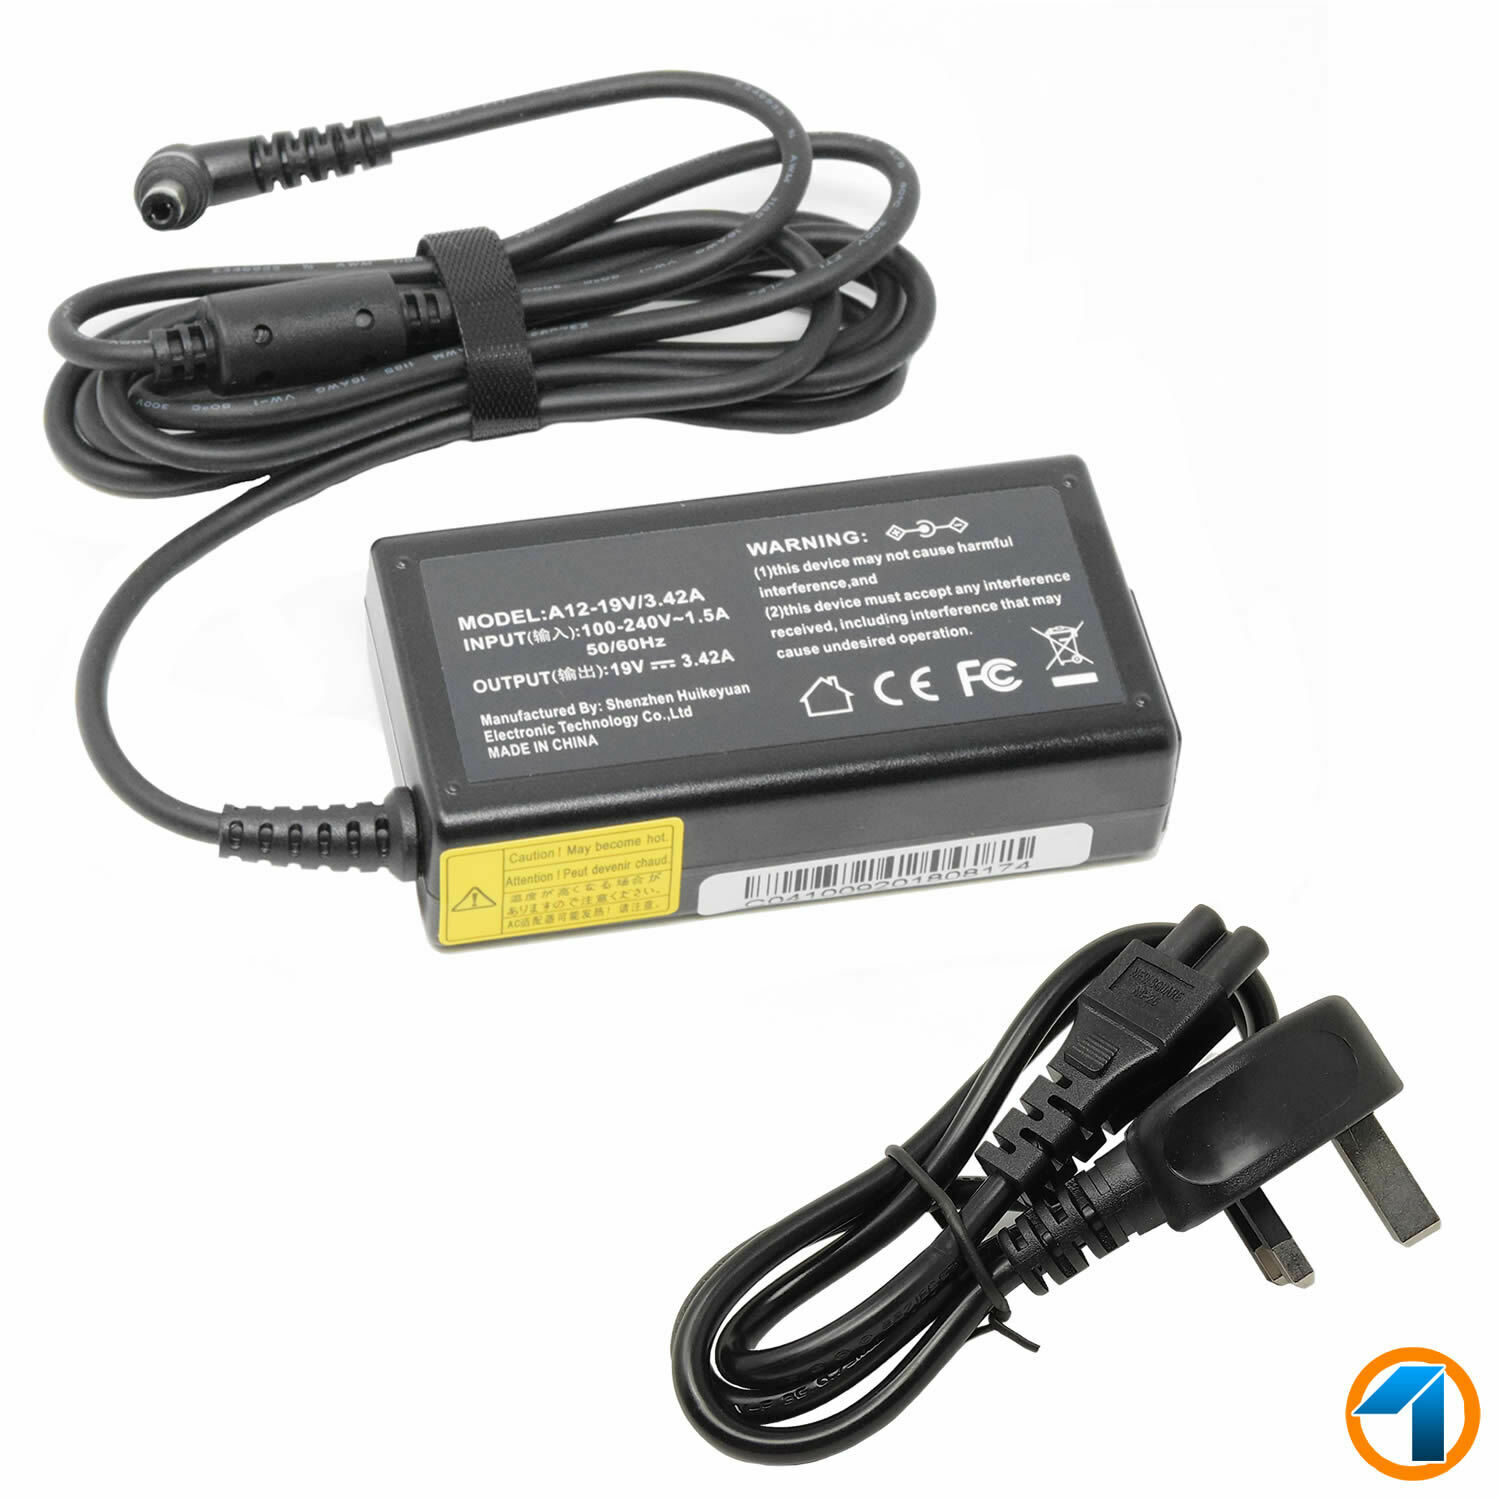 ASUS X555L 65W LAPTOP AC ADAPTER CHARGER POWER SUPPLY NEW Output AMP/Current: 3